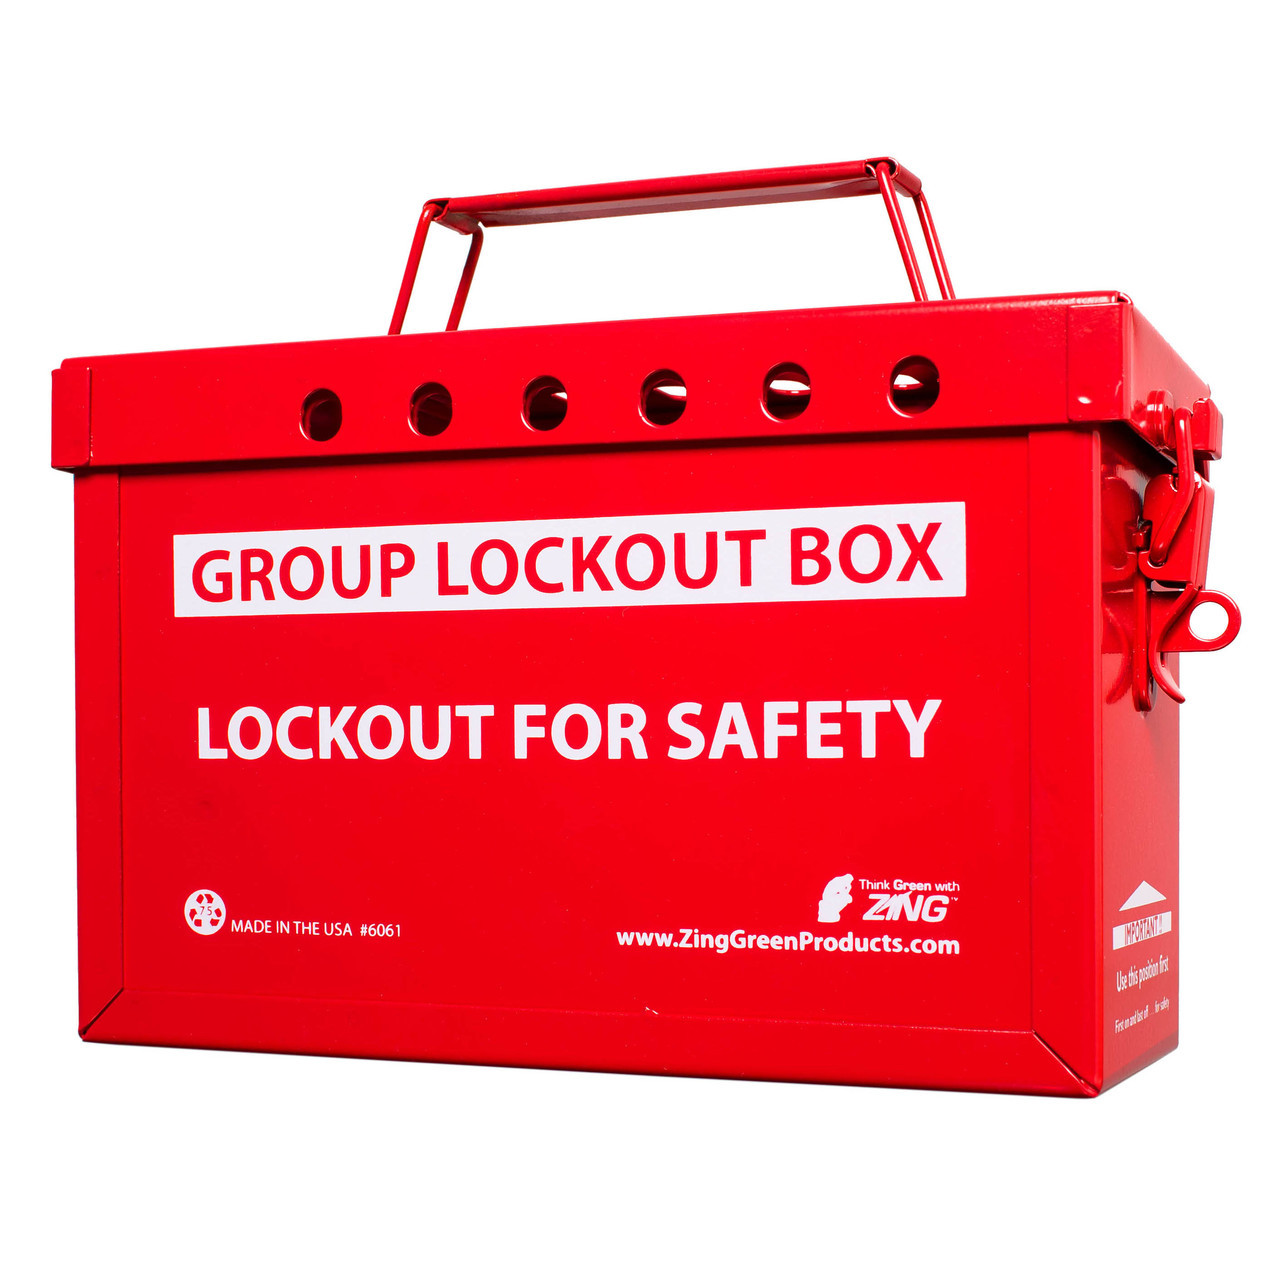 ZING RecycLockout Group Lockout Box (Red)